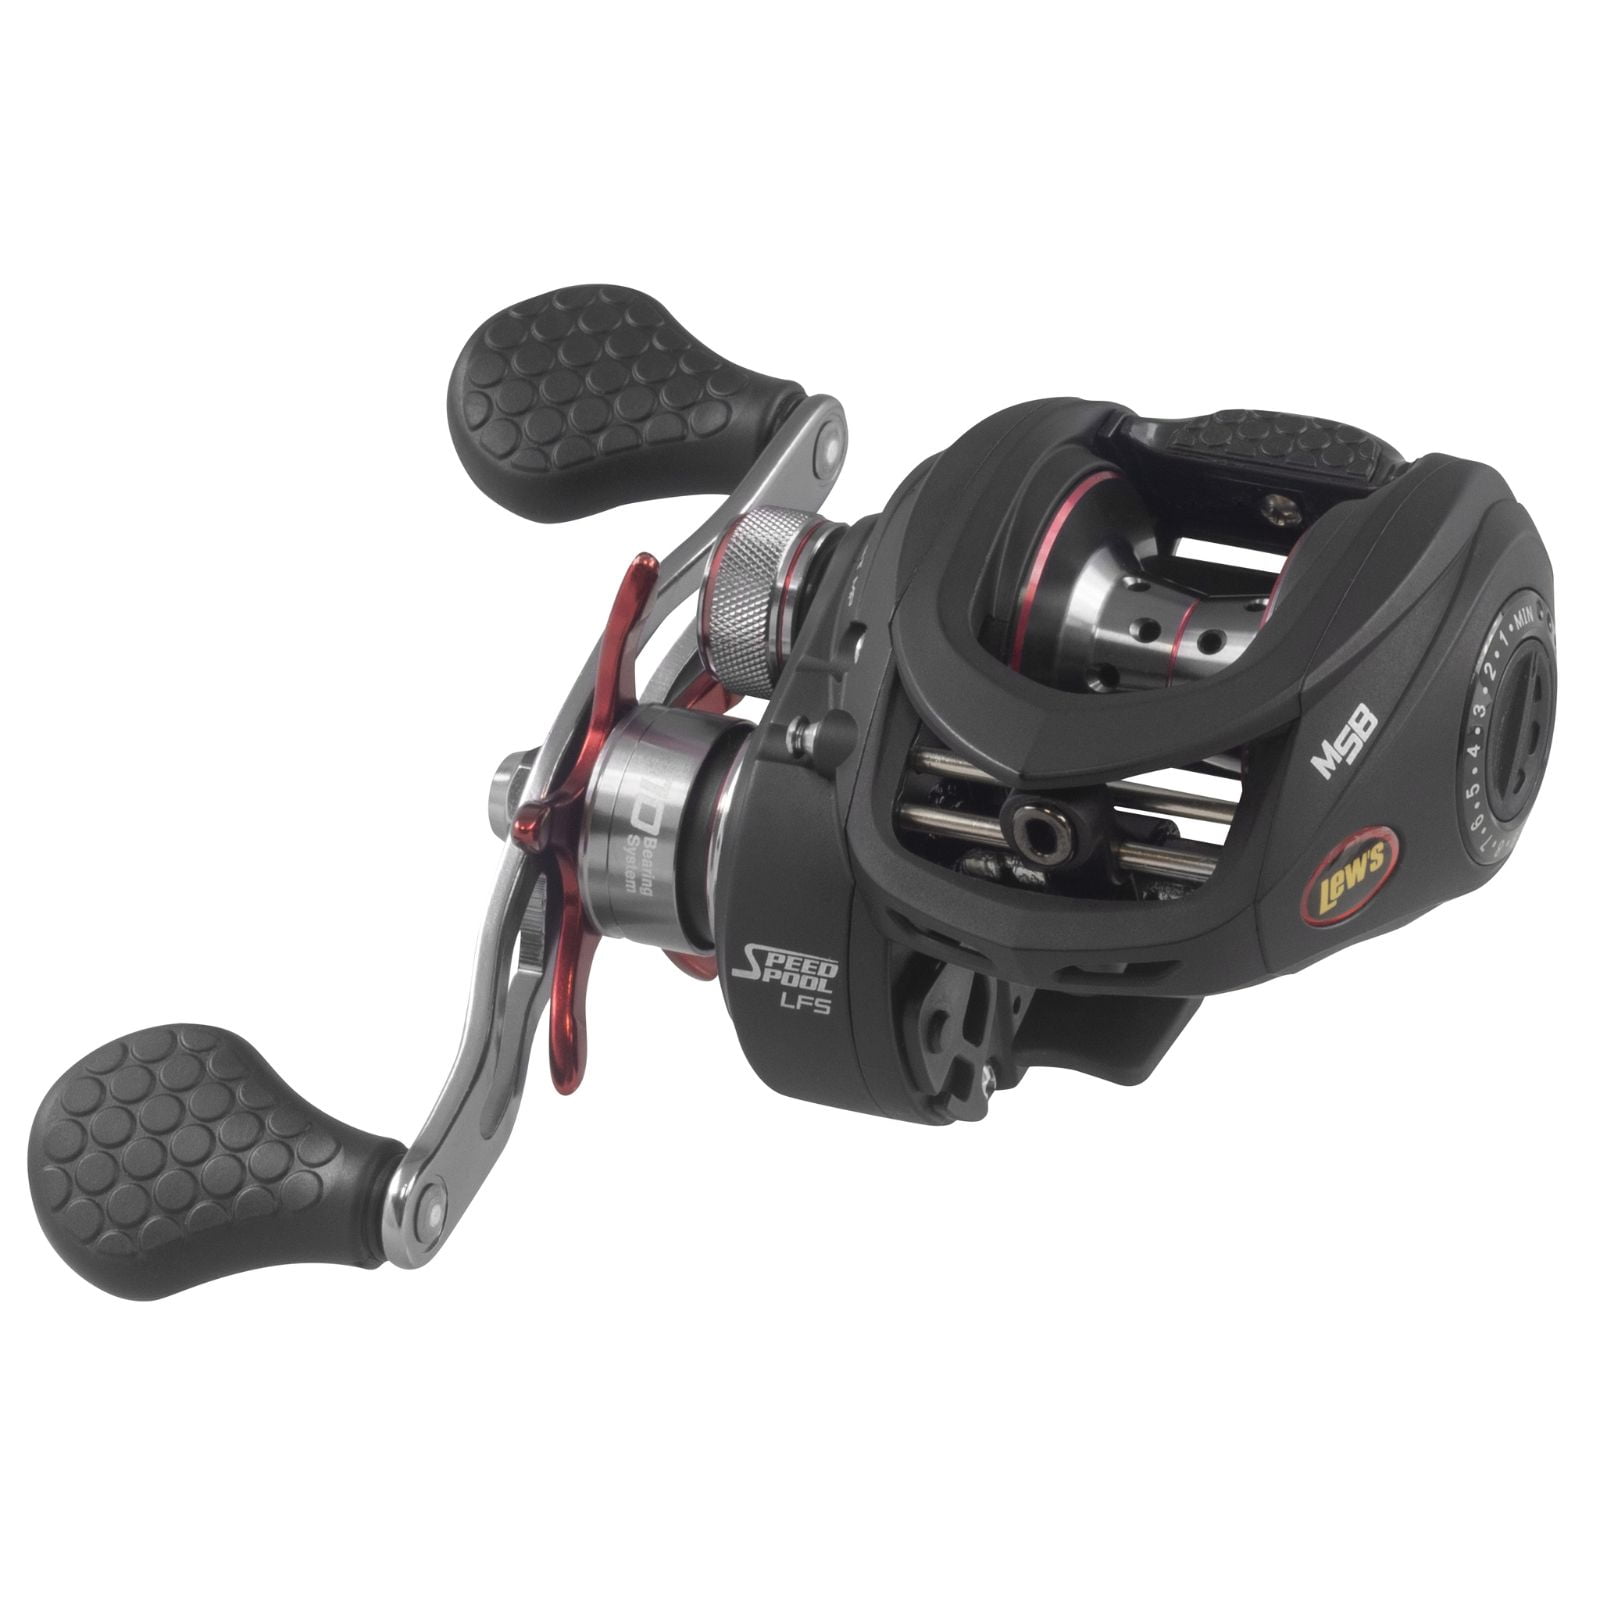 Lew's Tournament MP Speed Spool Baitcast Fishing Reel, Right-Hand Retrieve,  8.3:1 Gear Ratio, One-Piece Aluminum Body with Graphite Side plate